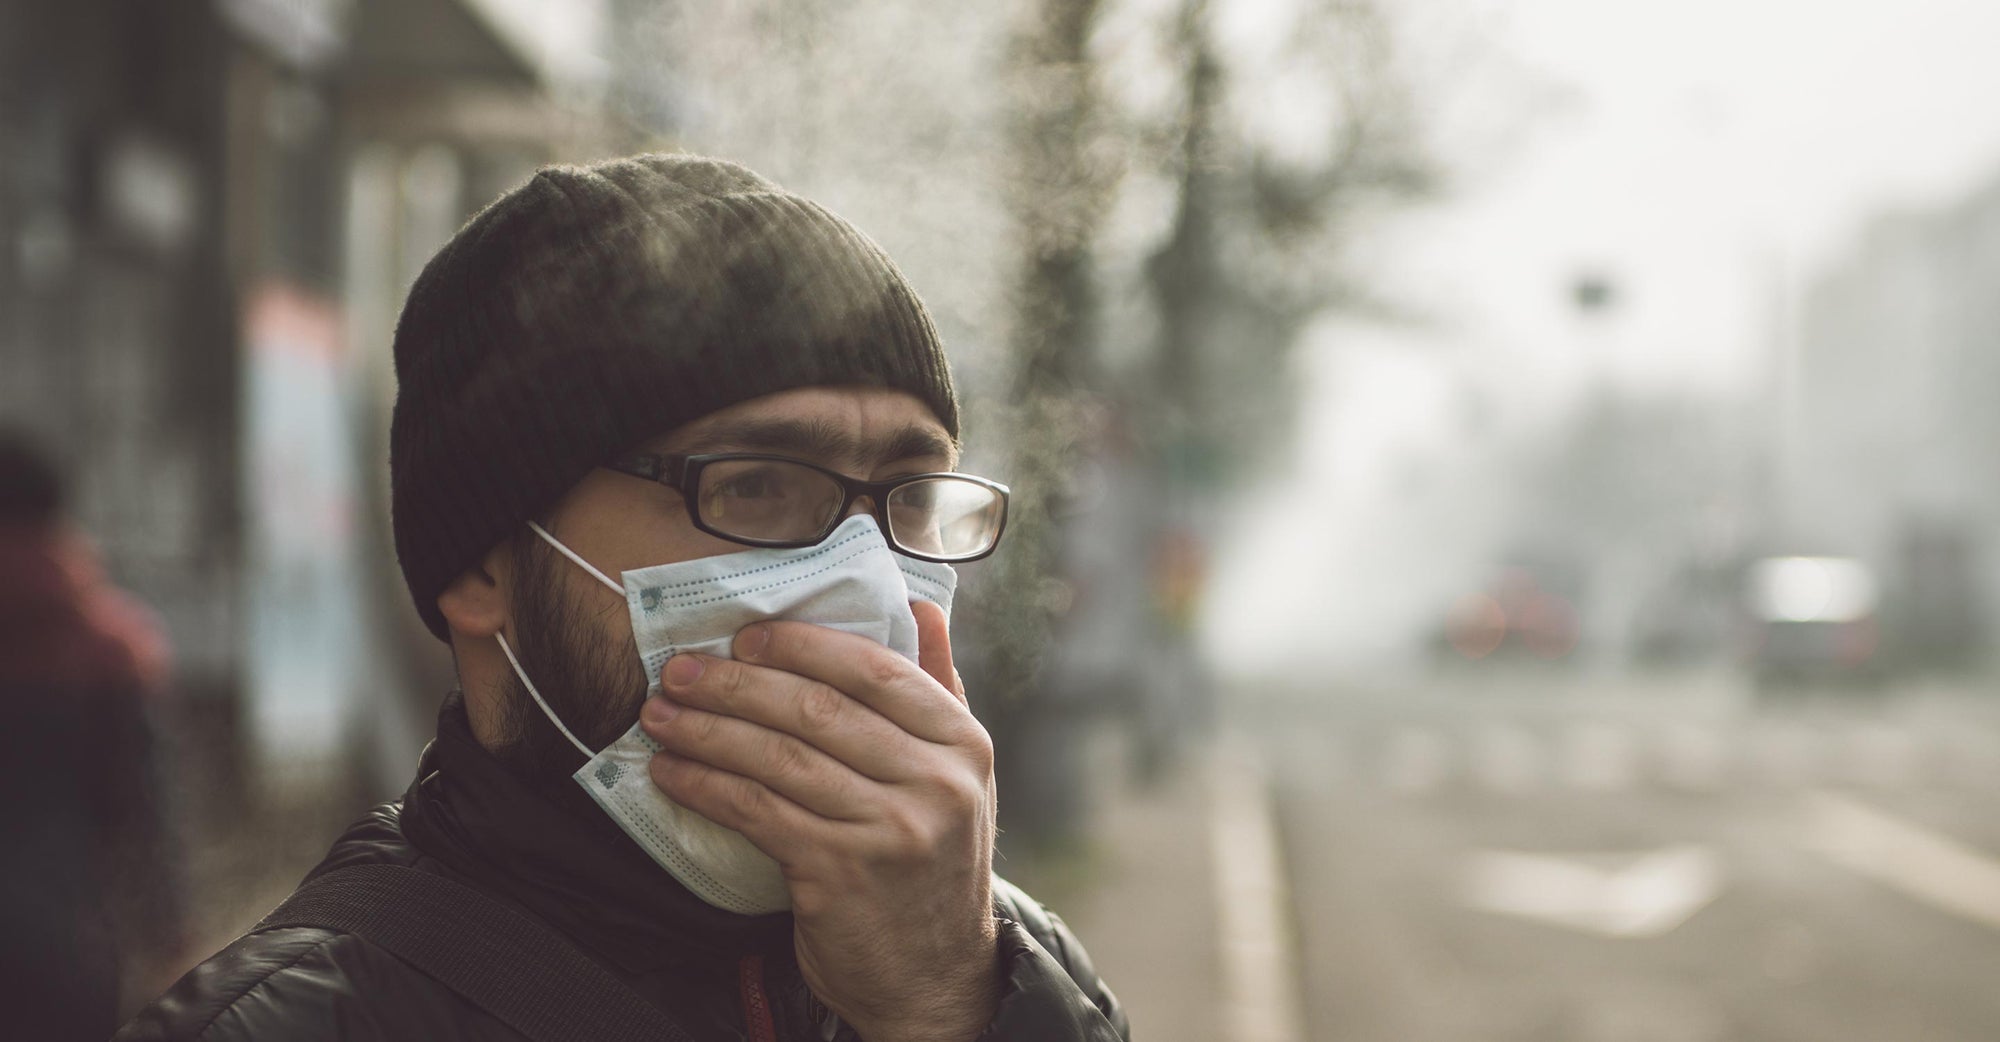 Man in city coughing with face mask